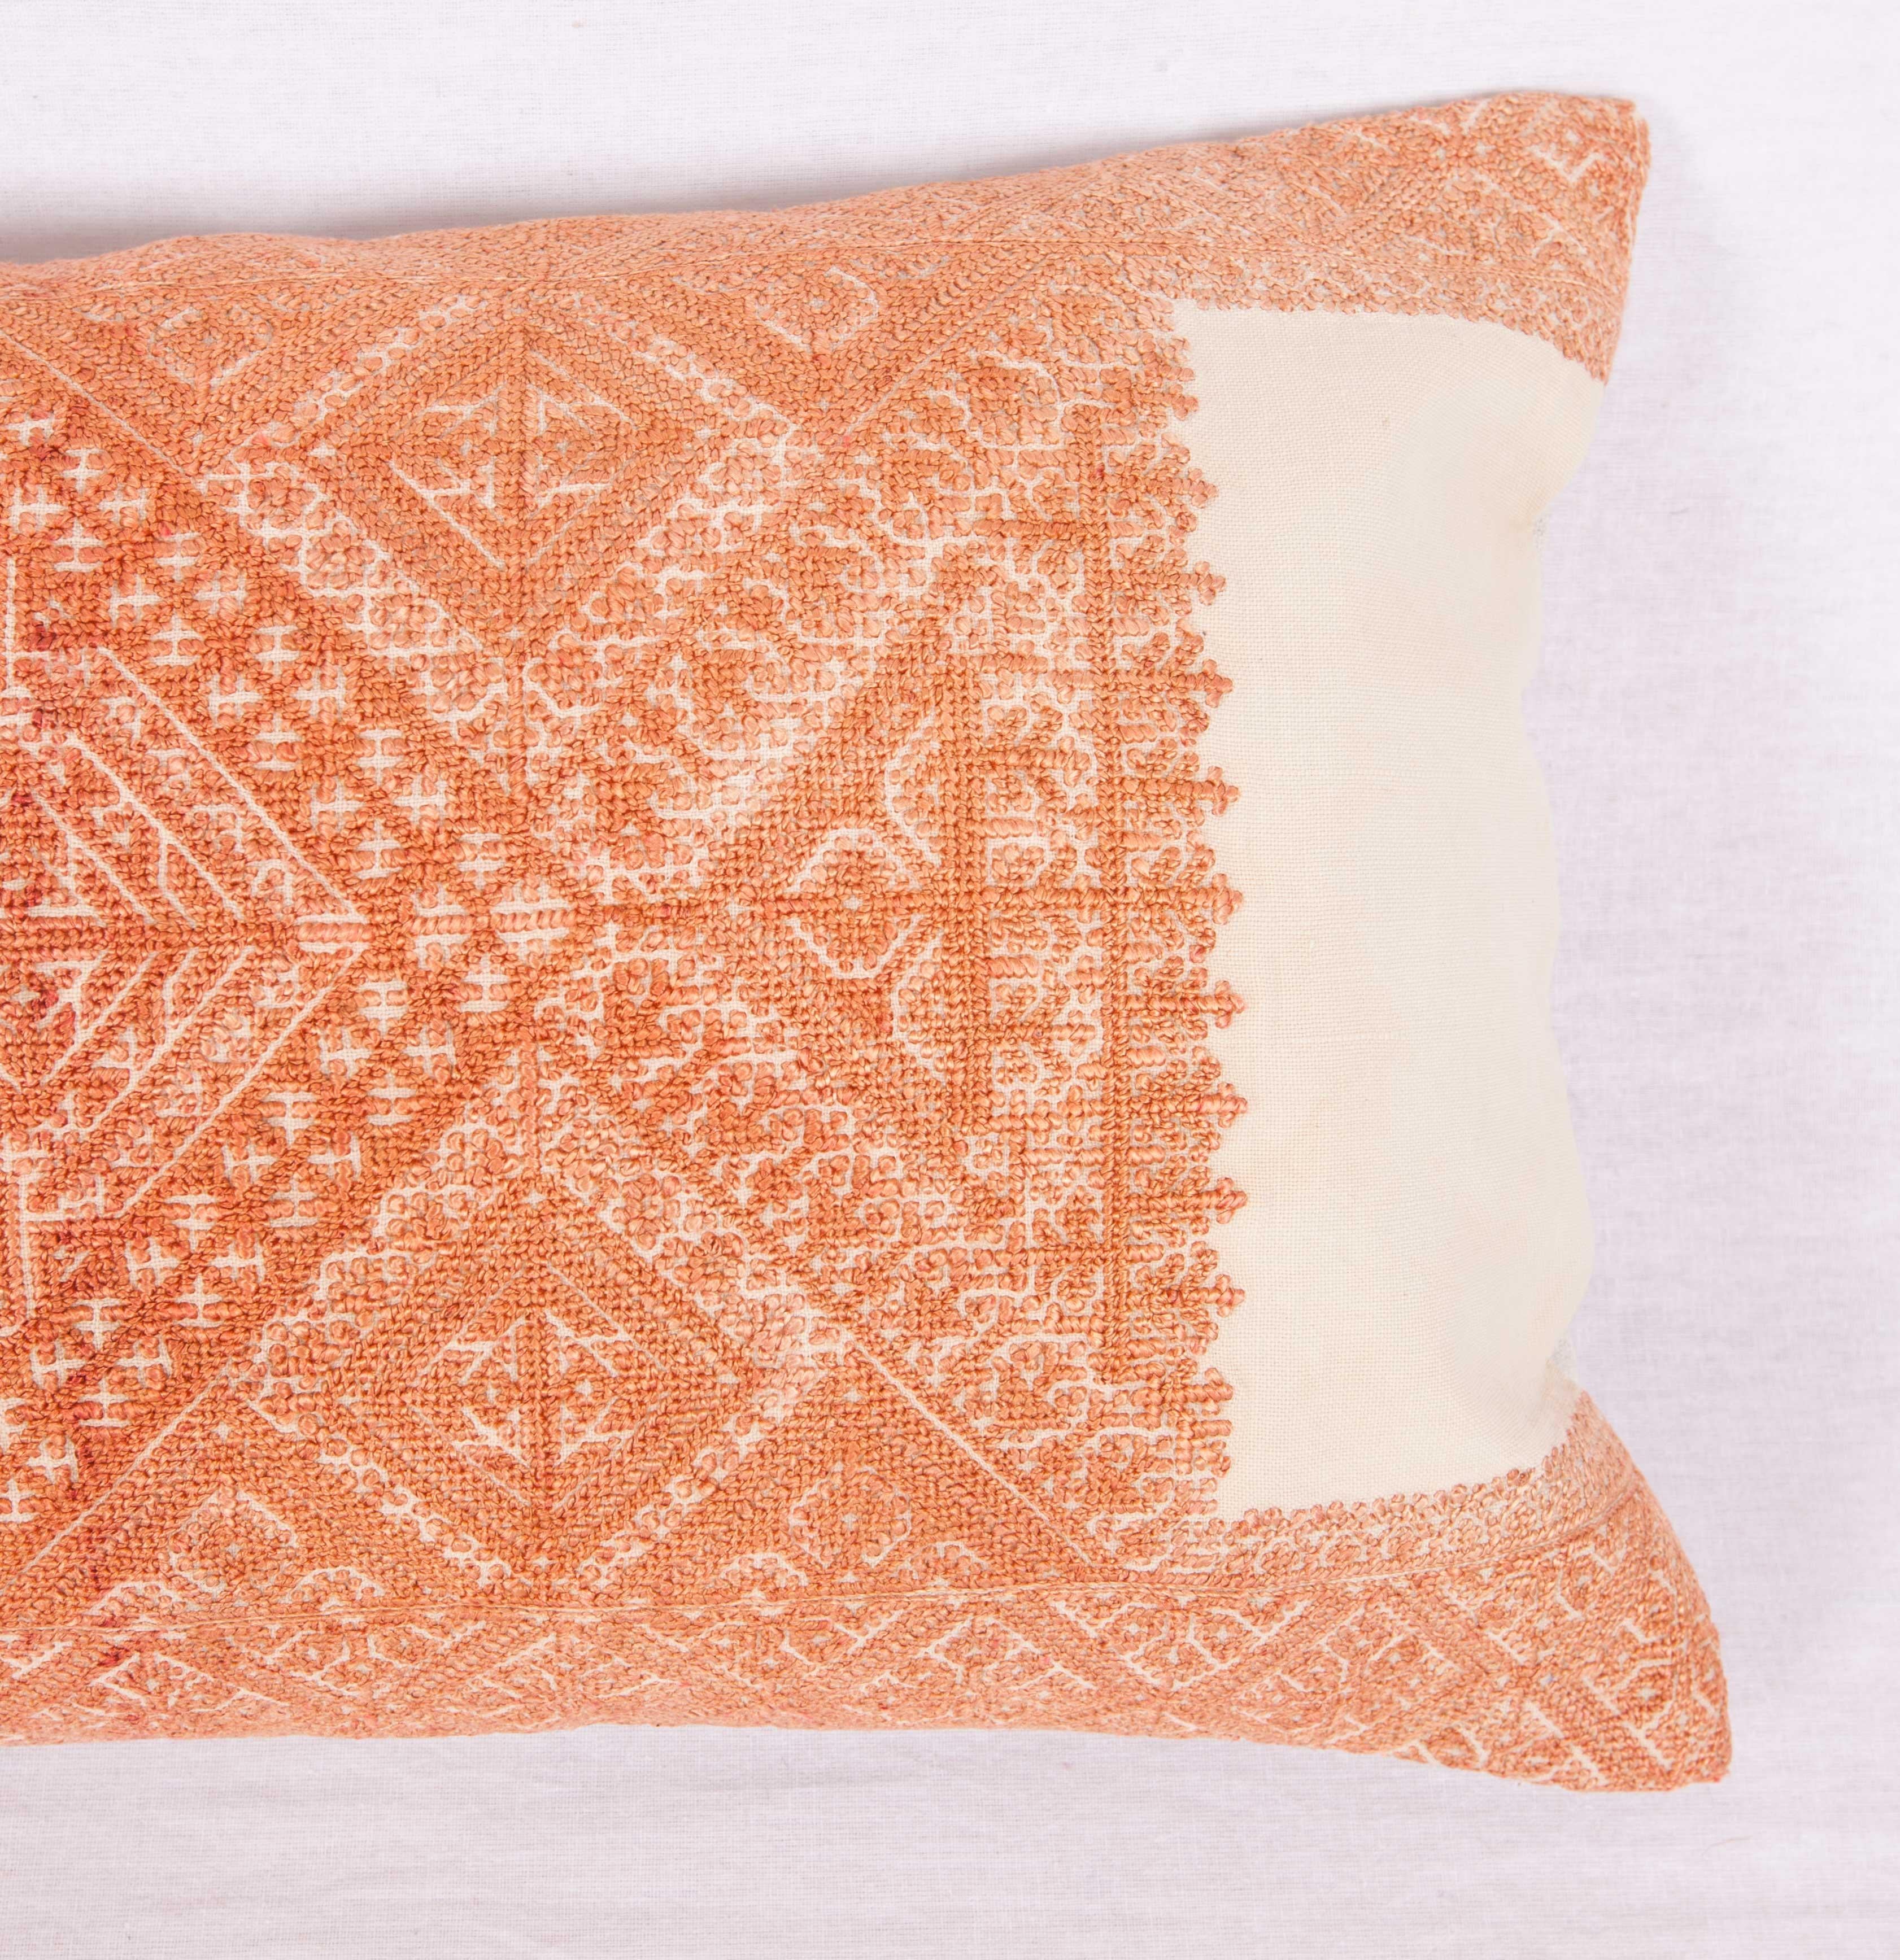 Suzani Pillow Case Made from an Early 20th Century Fez Embroidery from Morocco